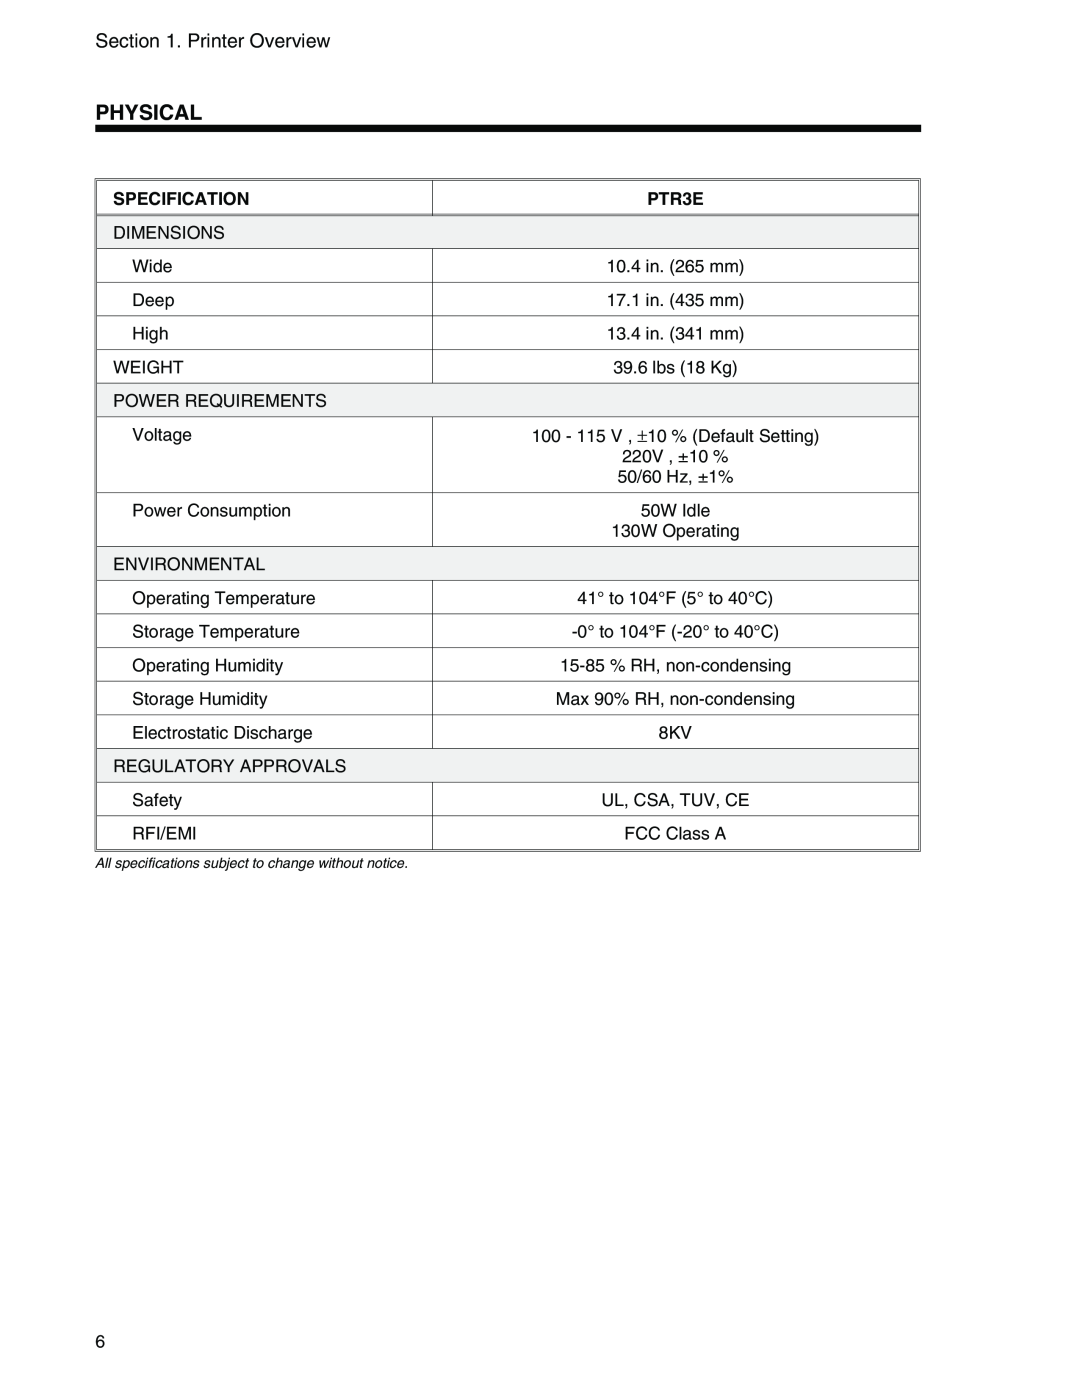 Panduit PTR3E manual Physical, Printer Overview, Specification 